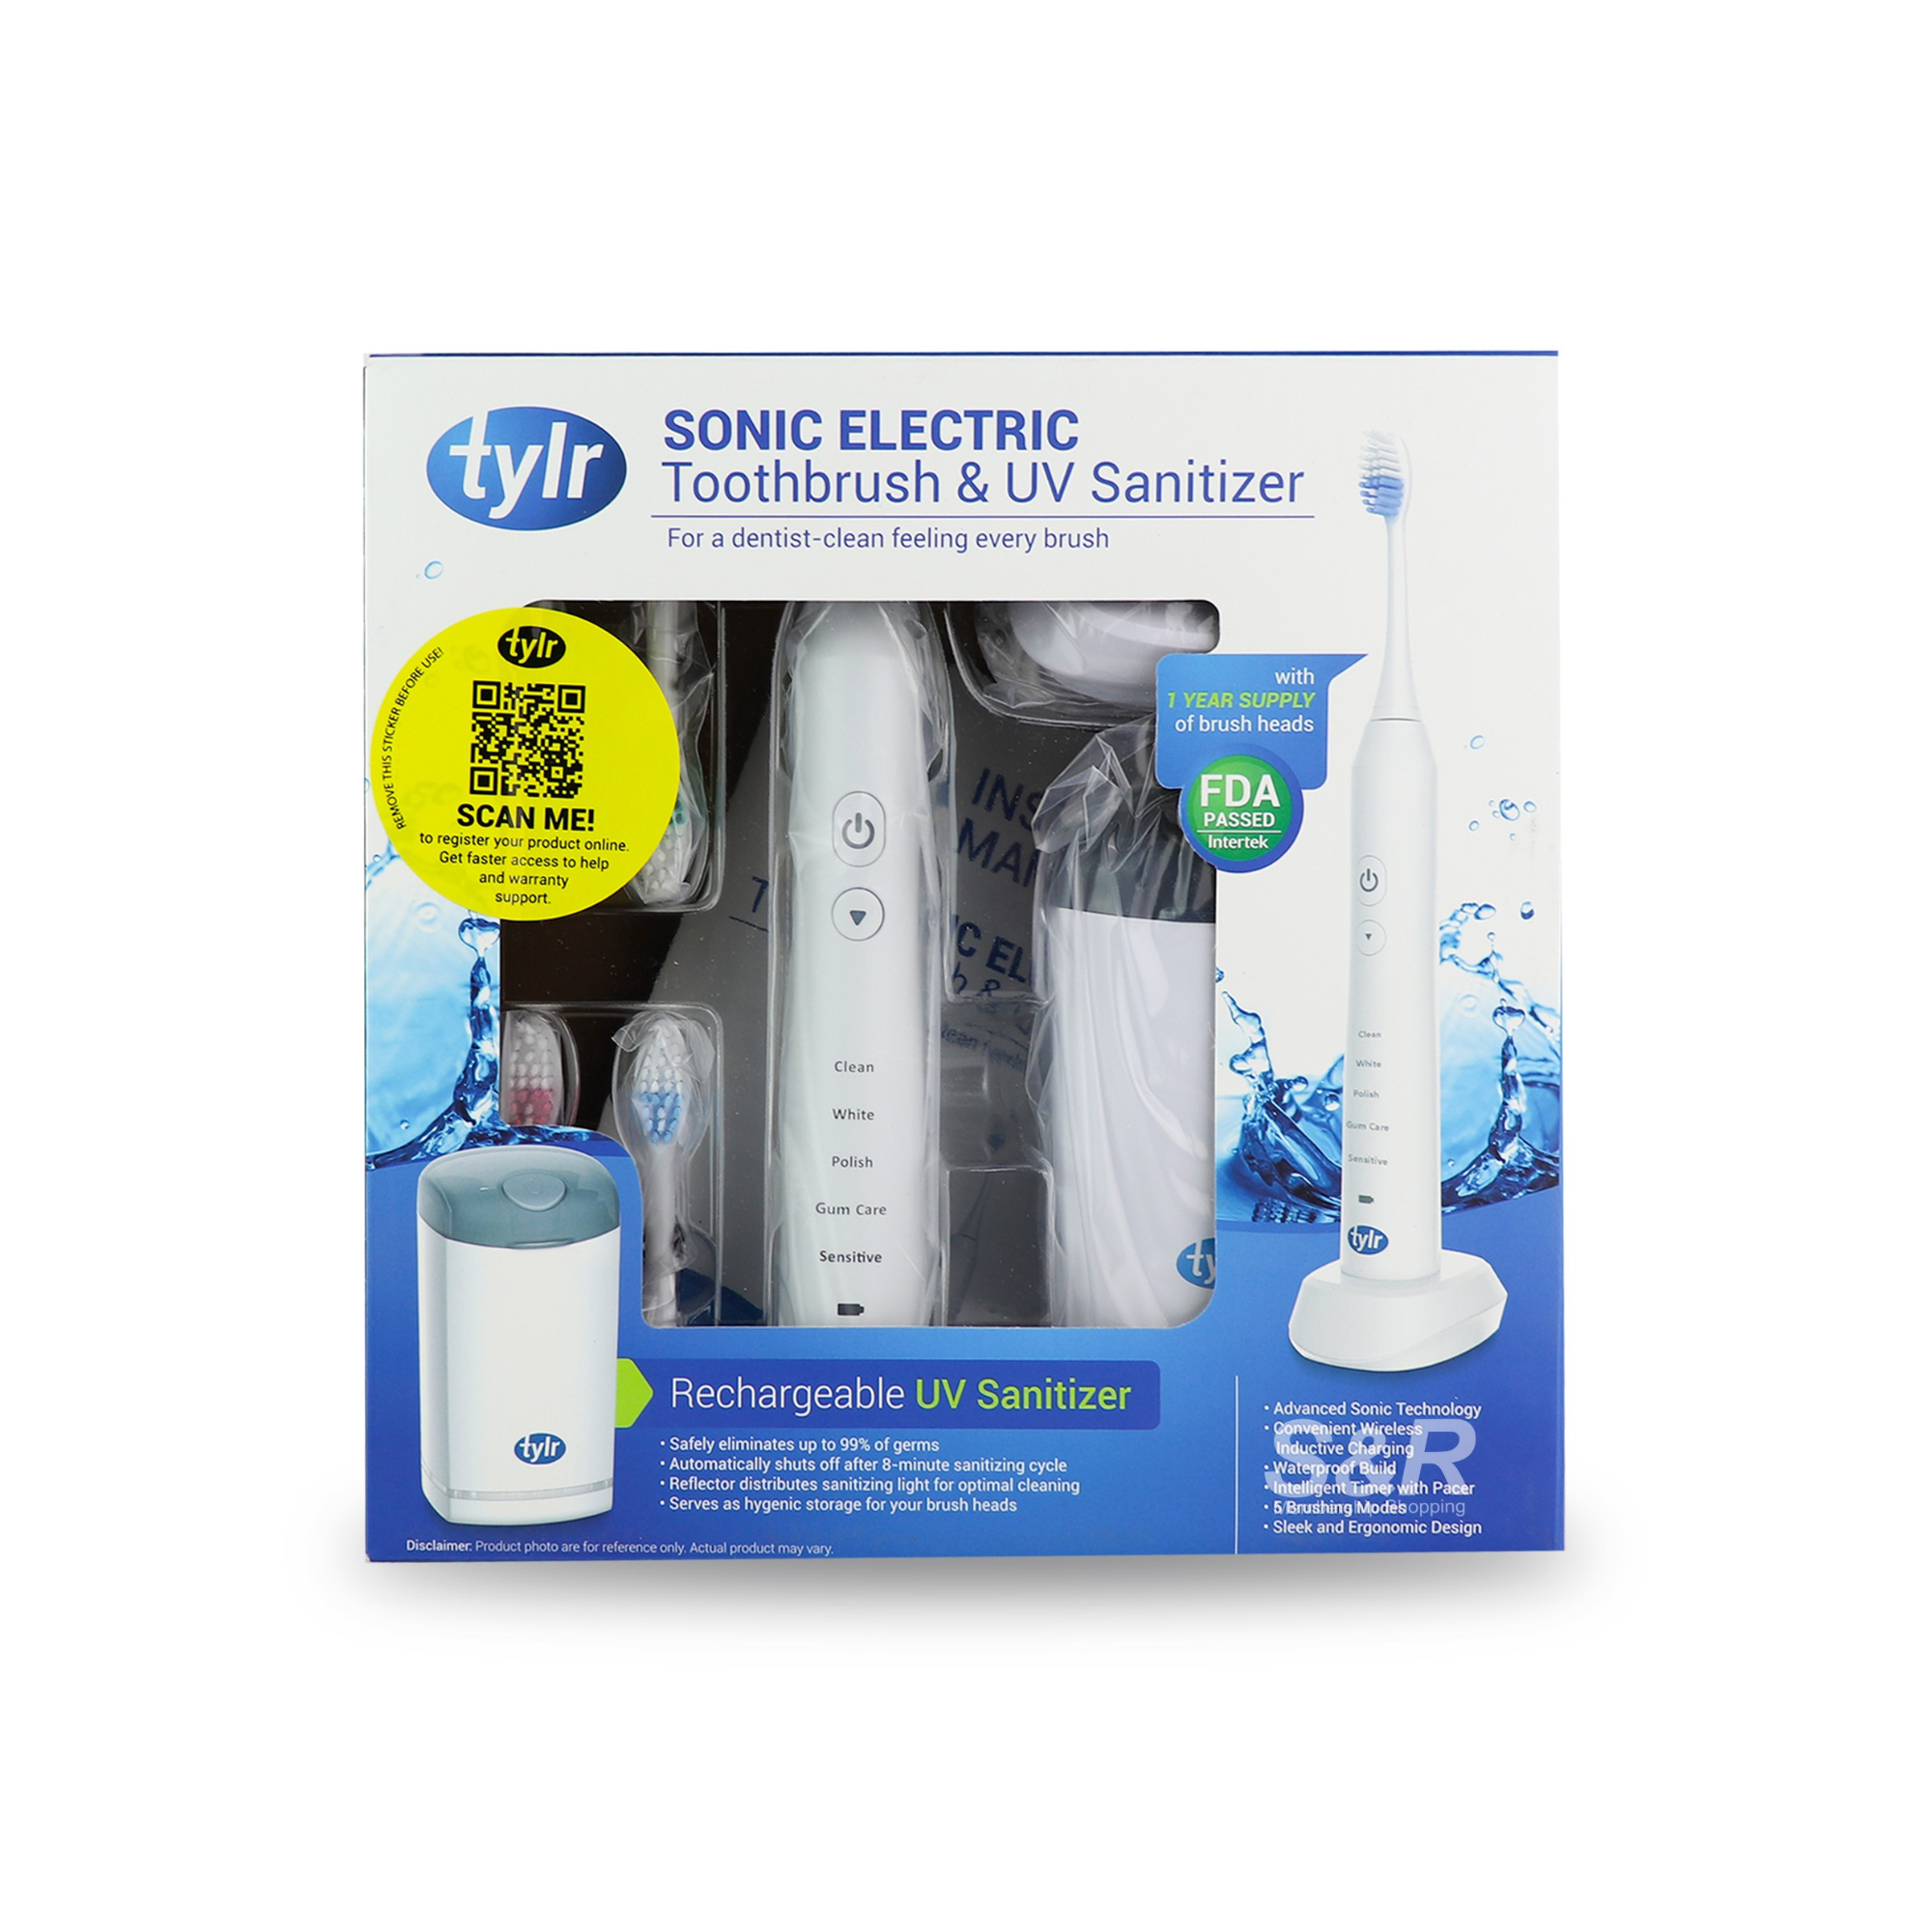 Tylr Sonic Electric Toothbrush and UV Sanitizer TYL-TB9033 1pc